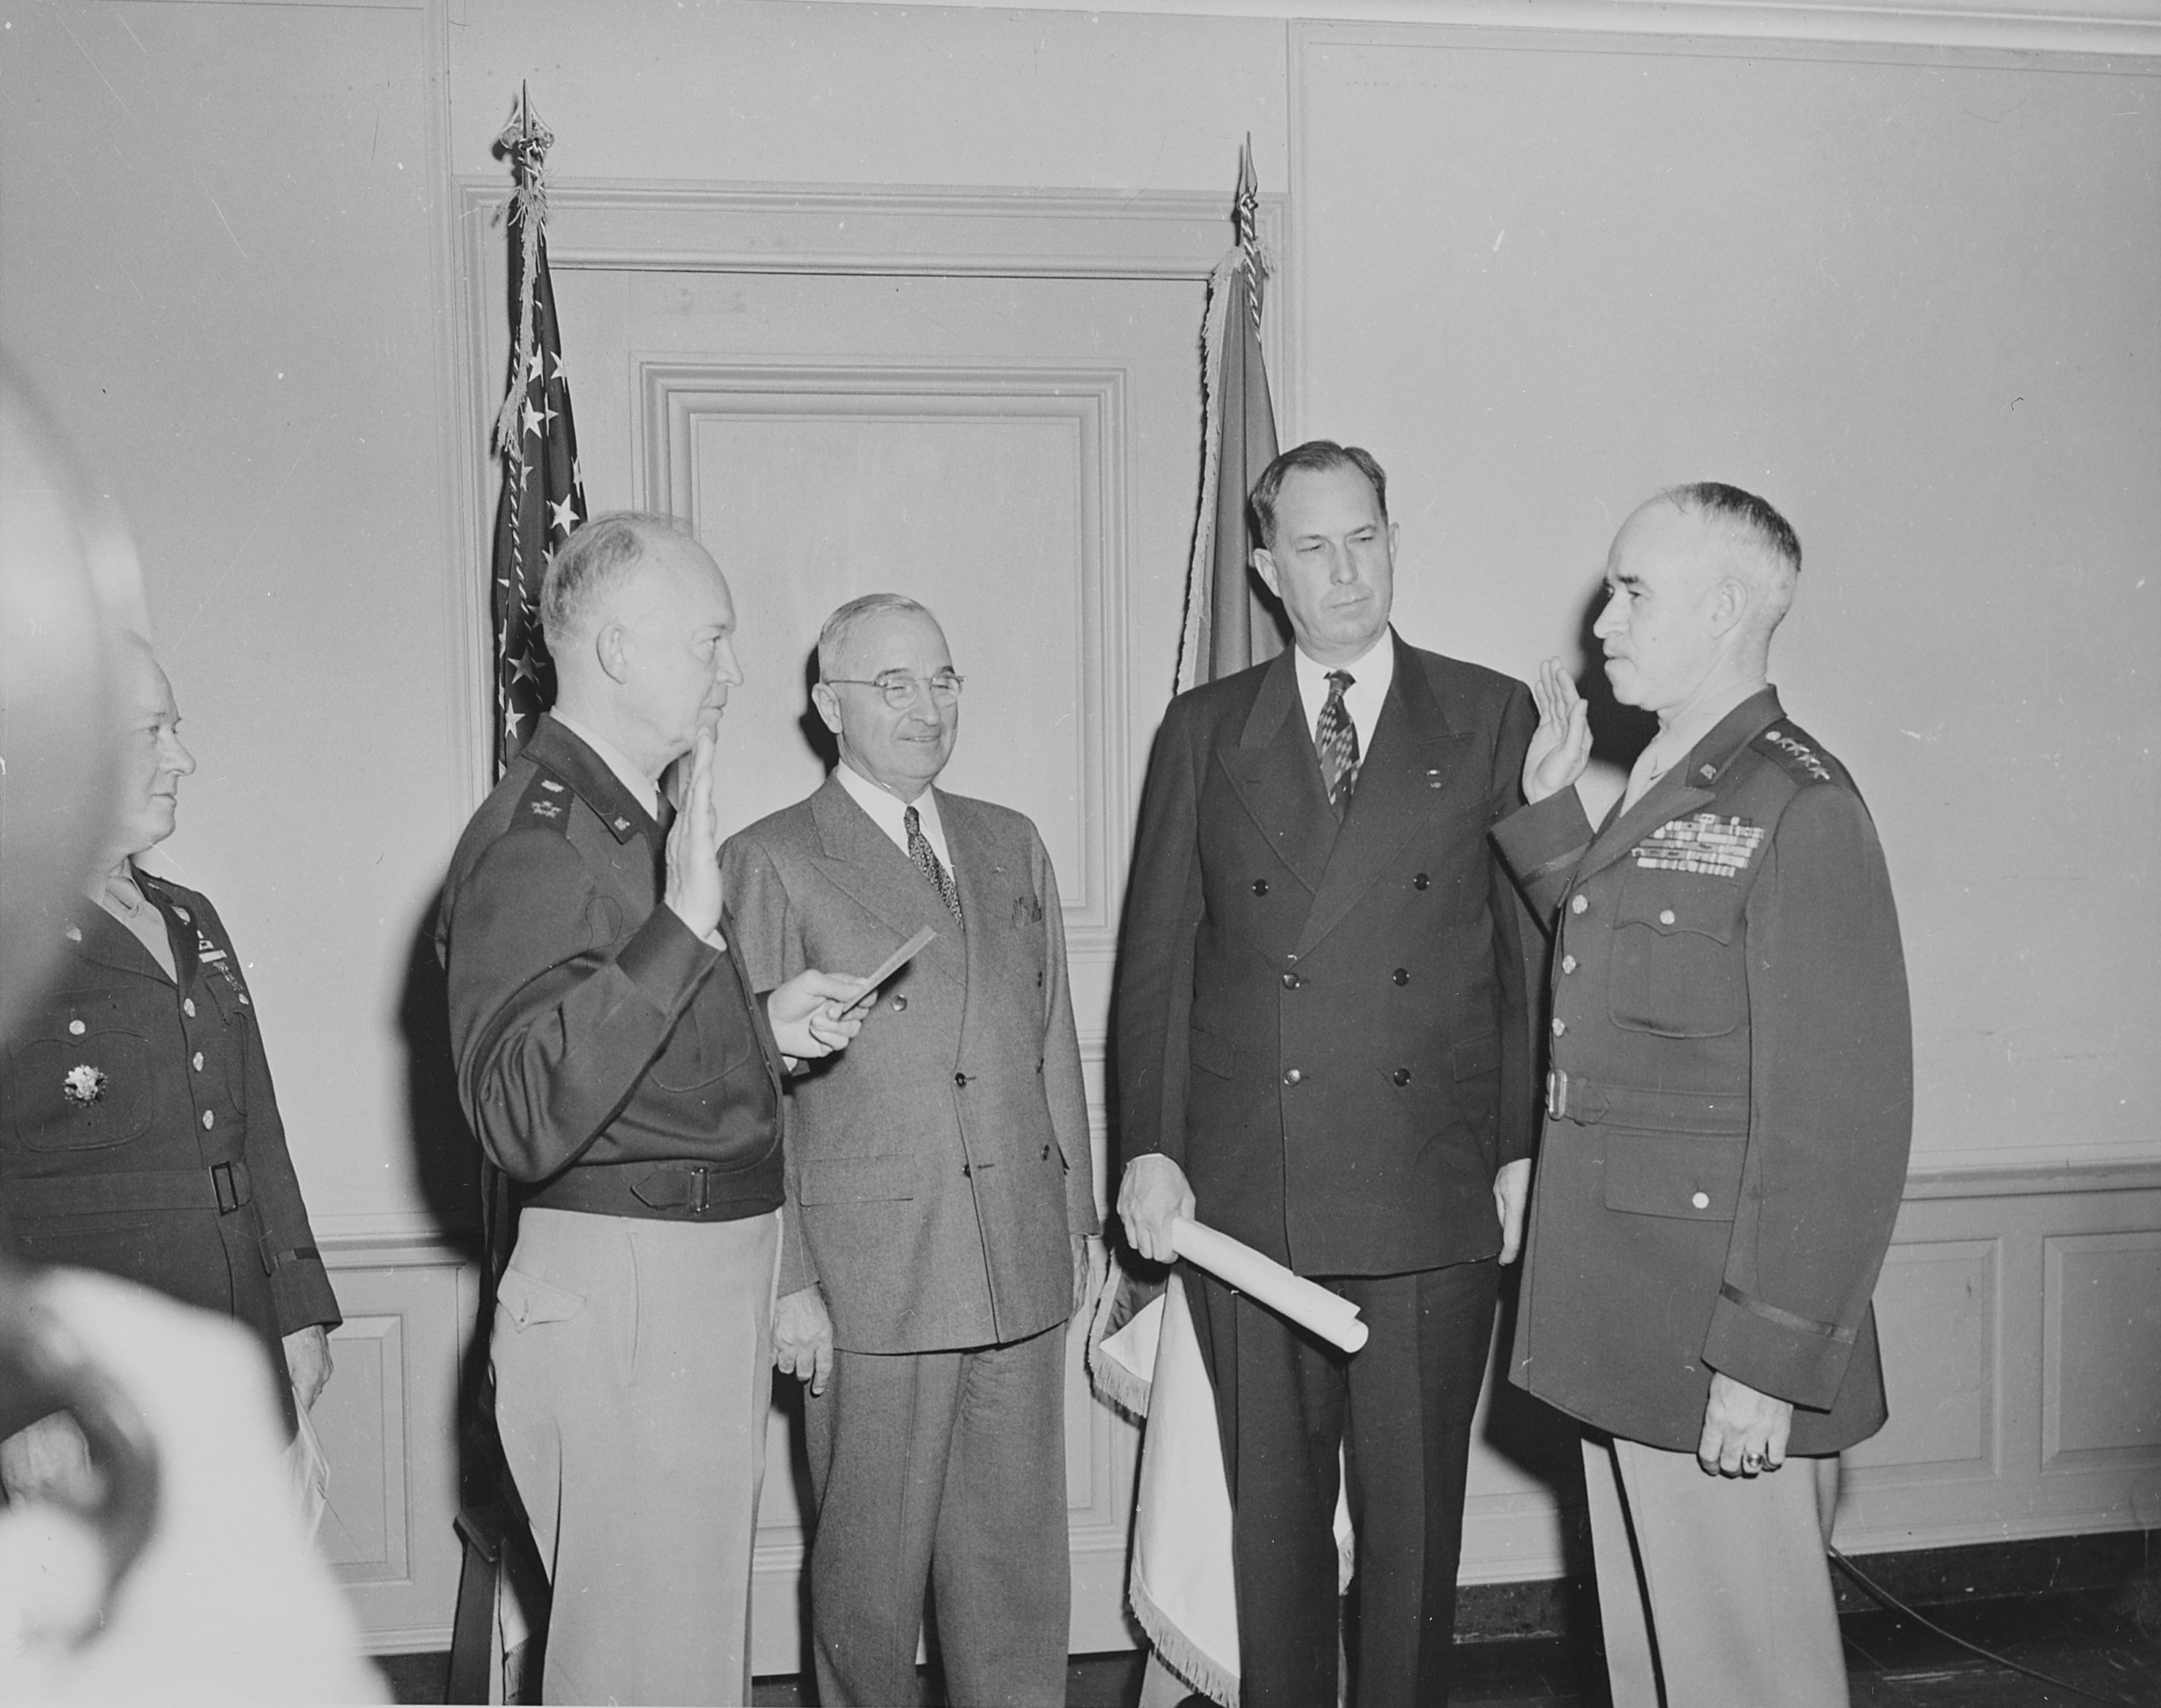 General Dwight Eisenhower swearing General Omar Bradley into office as Chief of Staff of the US Army, Pentagon, Arlington, Virginia, United States, 7 Feb 1948, photo 1 of 3; note US President Harry Truman and Secretary of Army Kenneth Royall in background